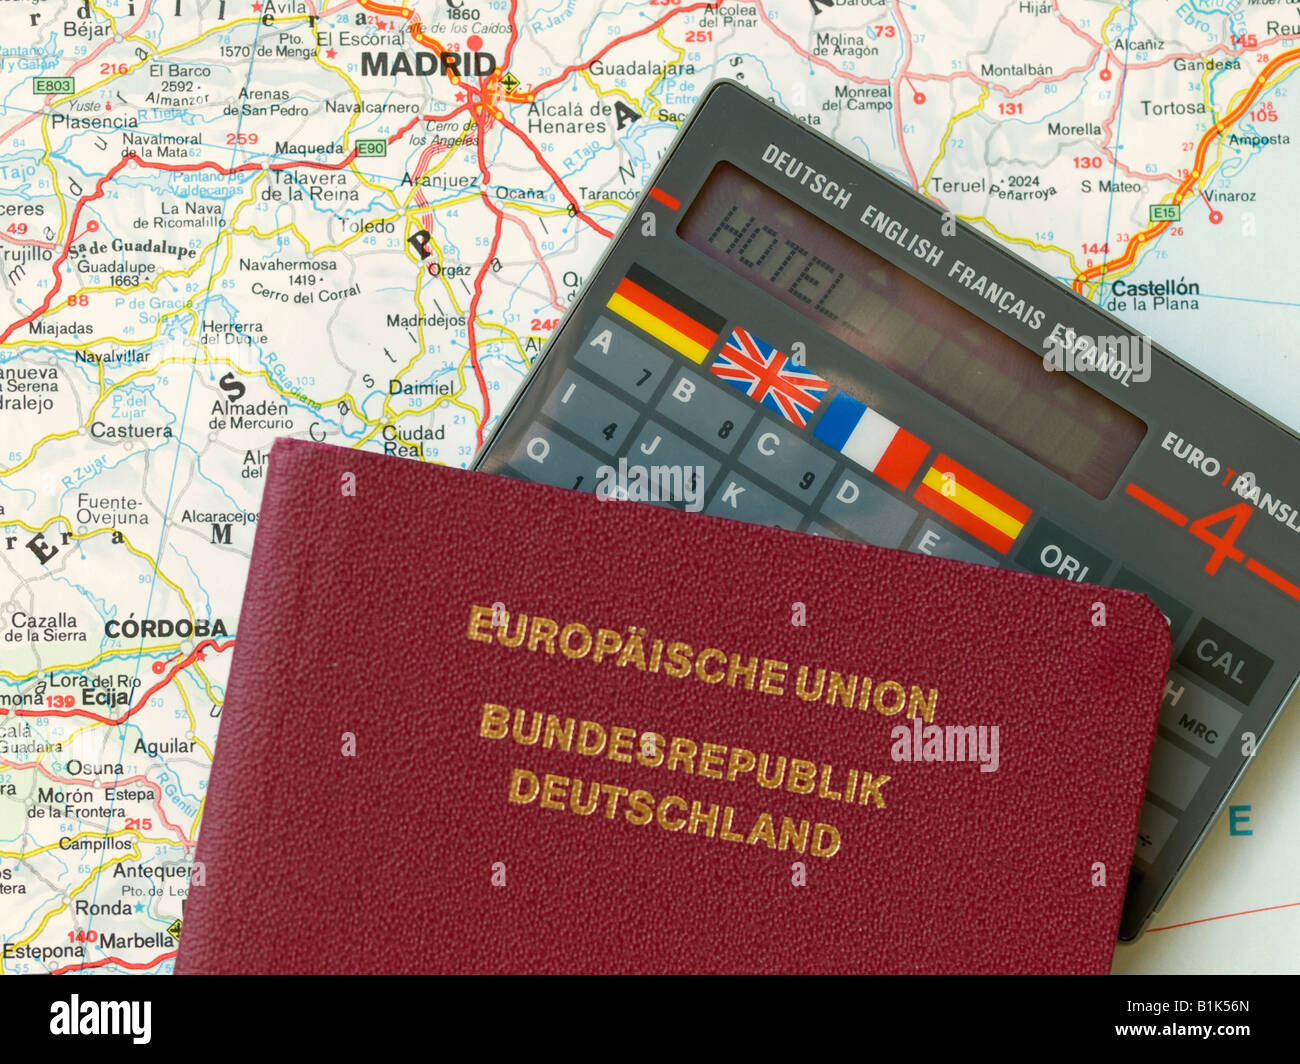 passport travel translation computer tool instrument on a map of Spain with Madrid Stock Photo